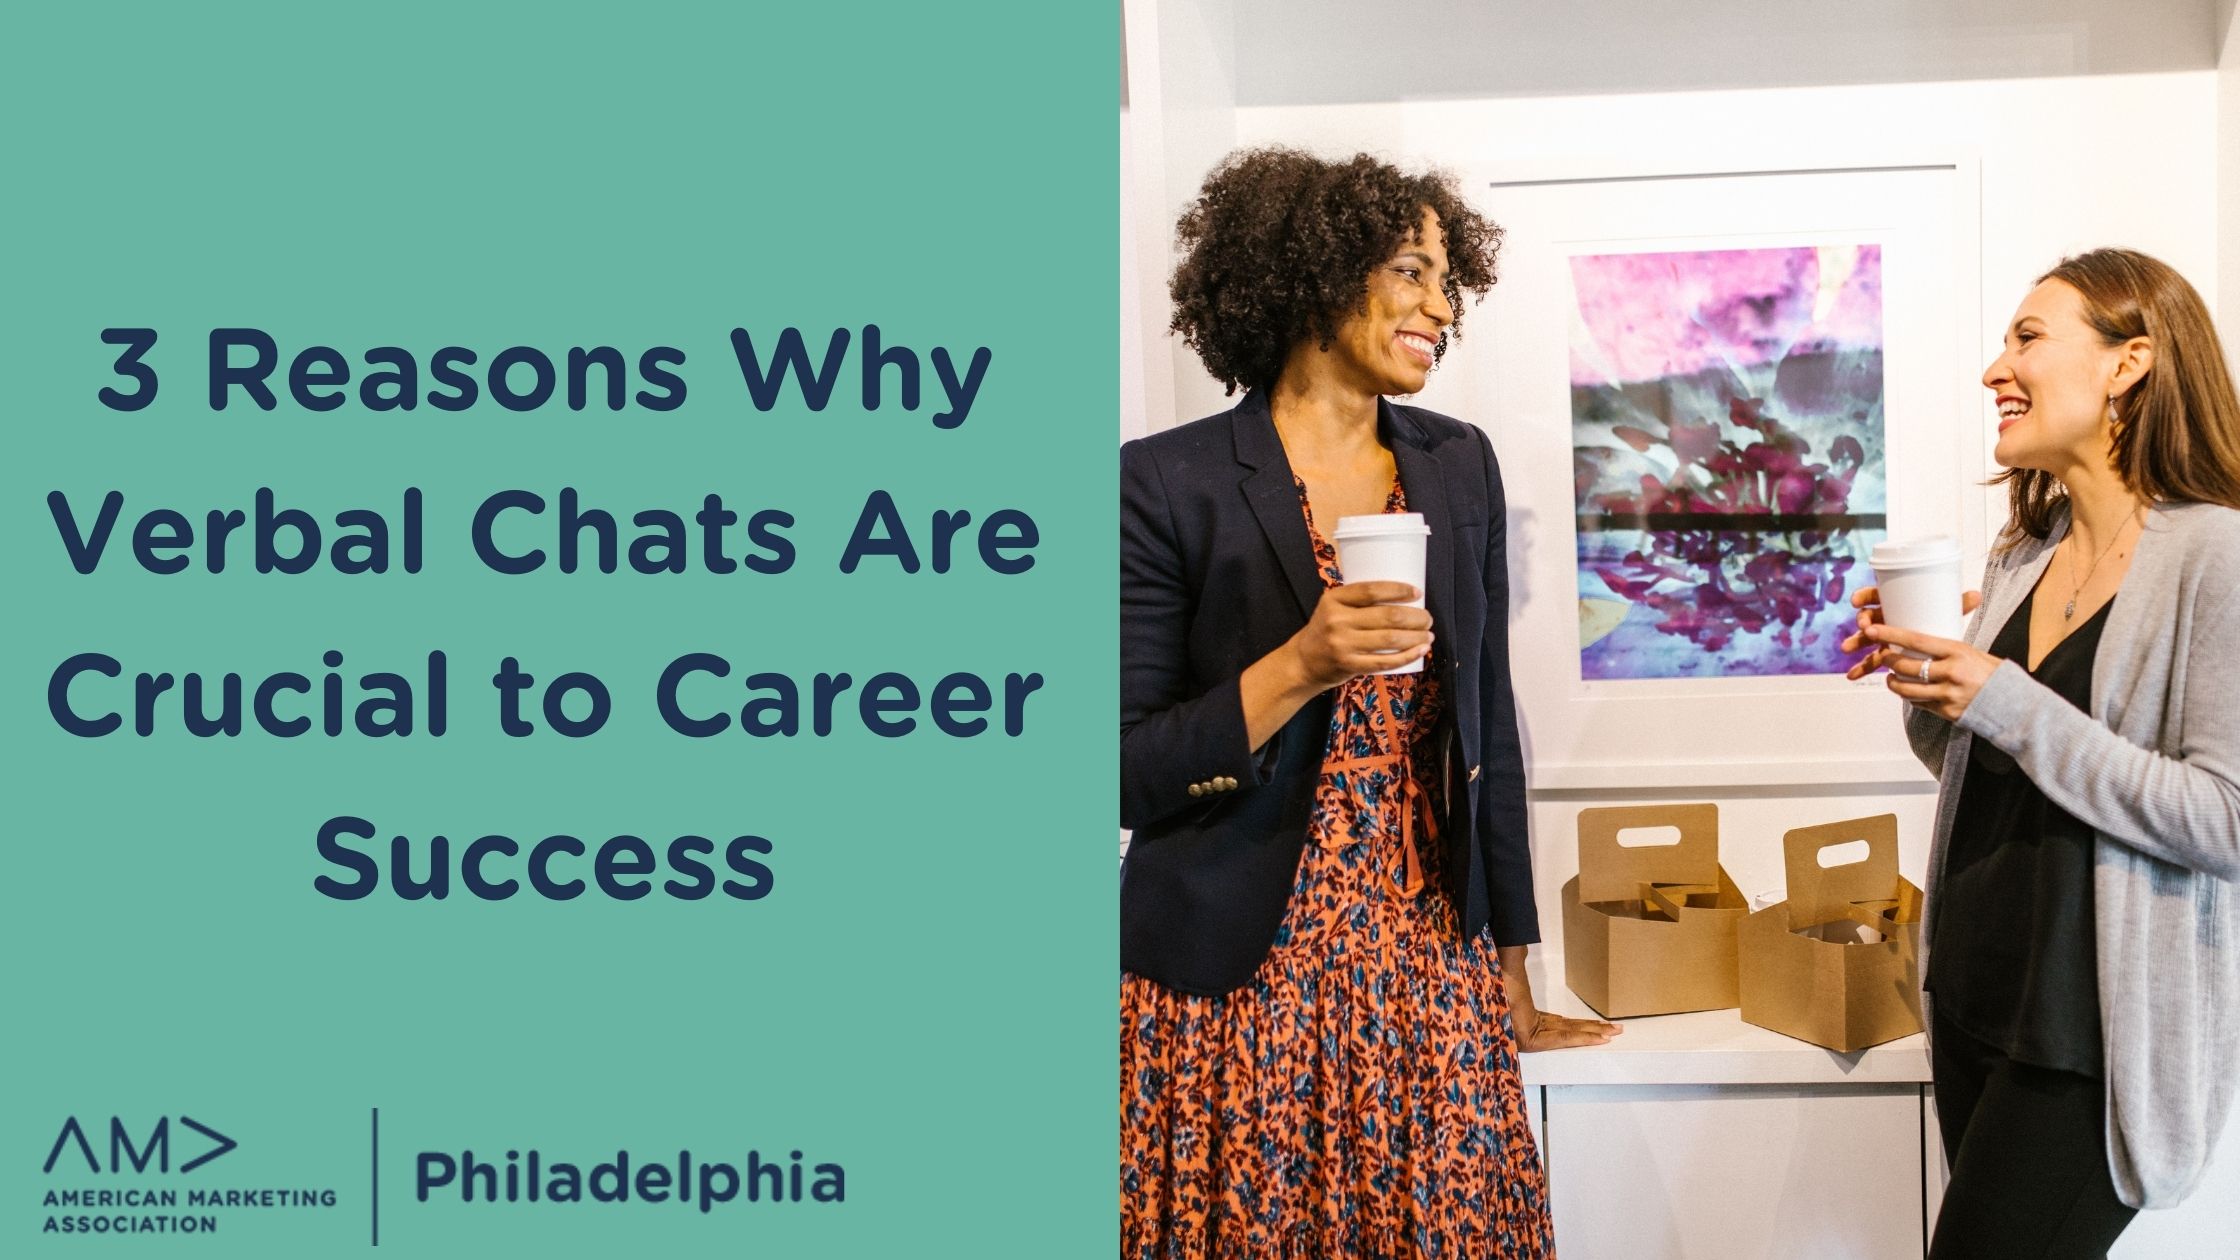 3 Reasons Why Verbal Chats Are Crucial To Career Success